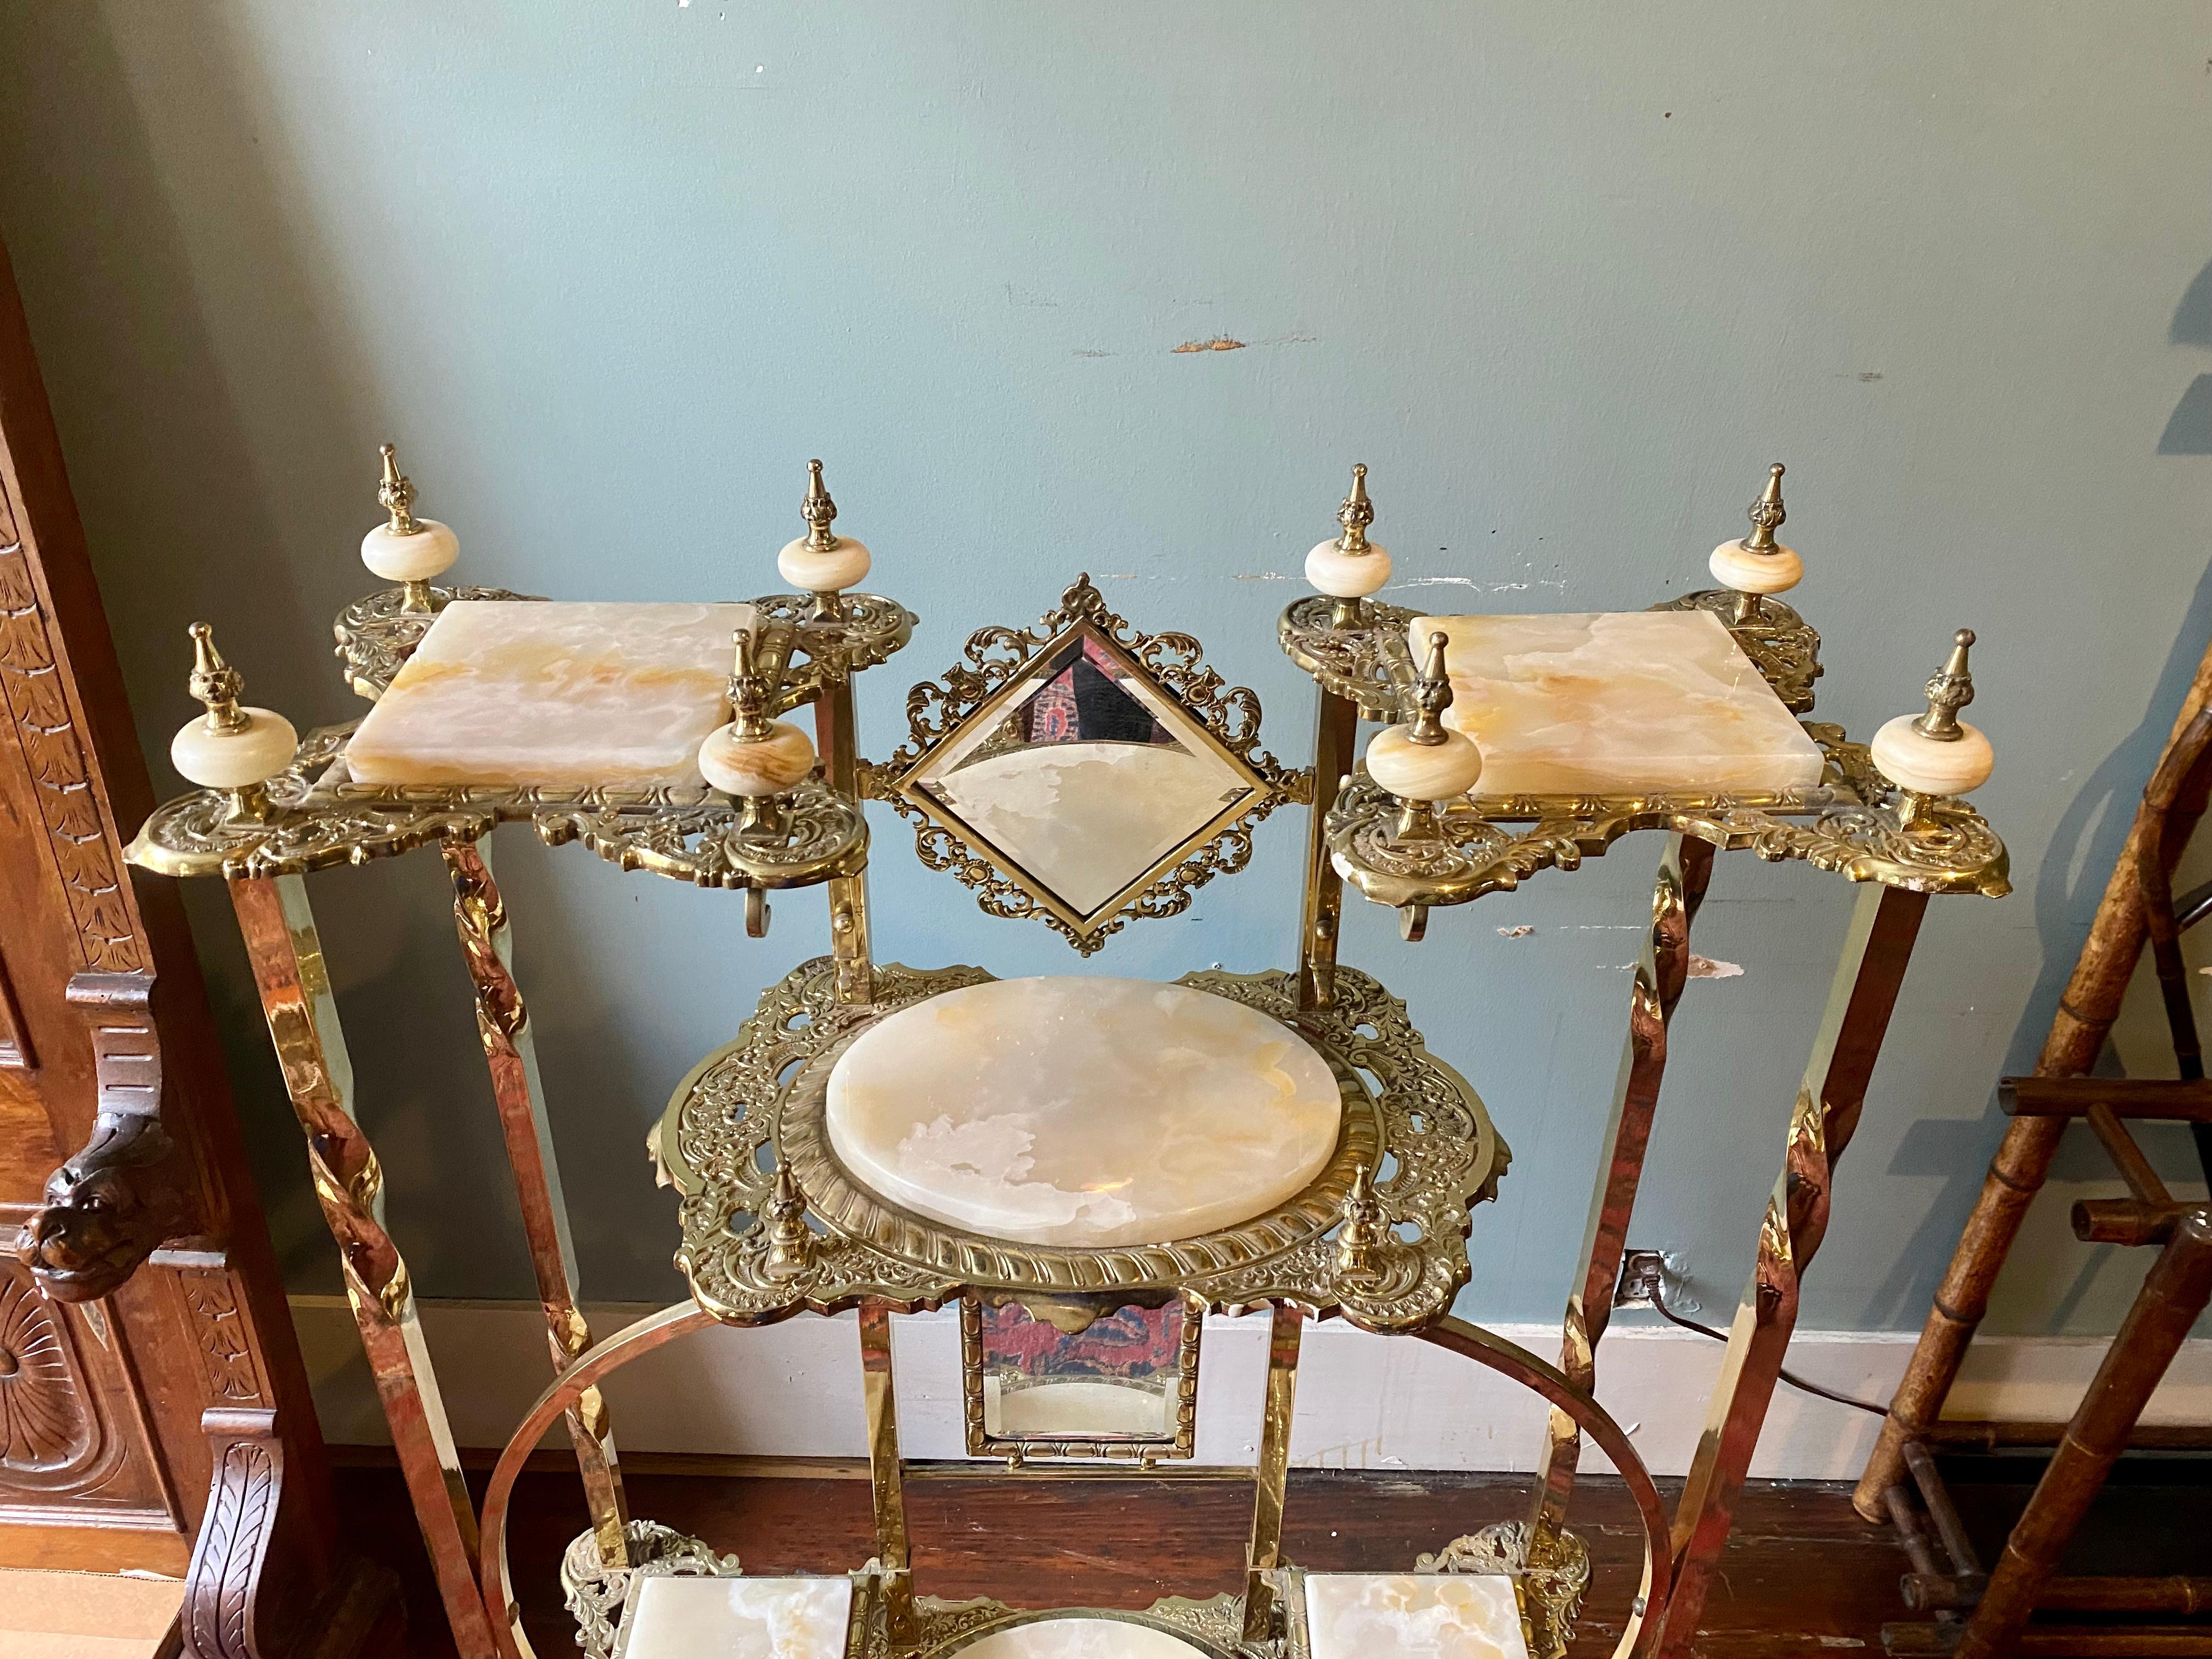 Antique English High Victorian Brass and Onyx Mirrored Etagere, Circa 1890-1910 1